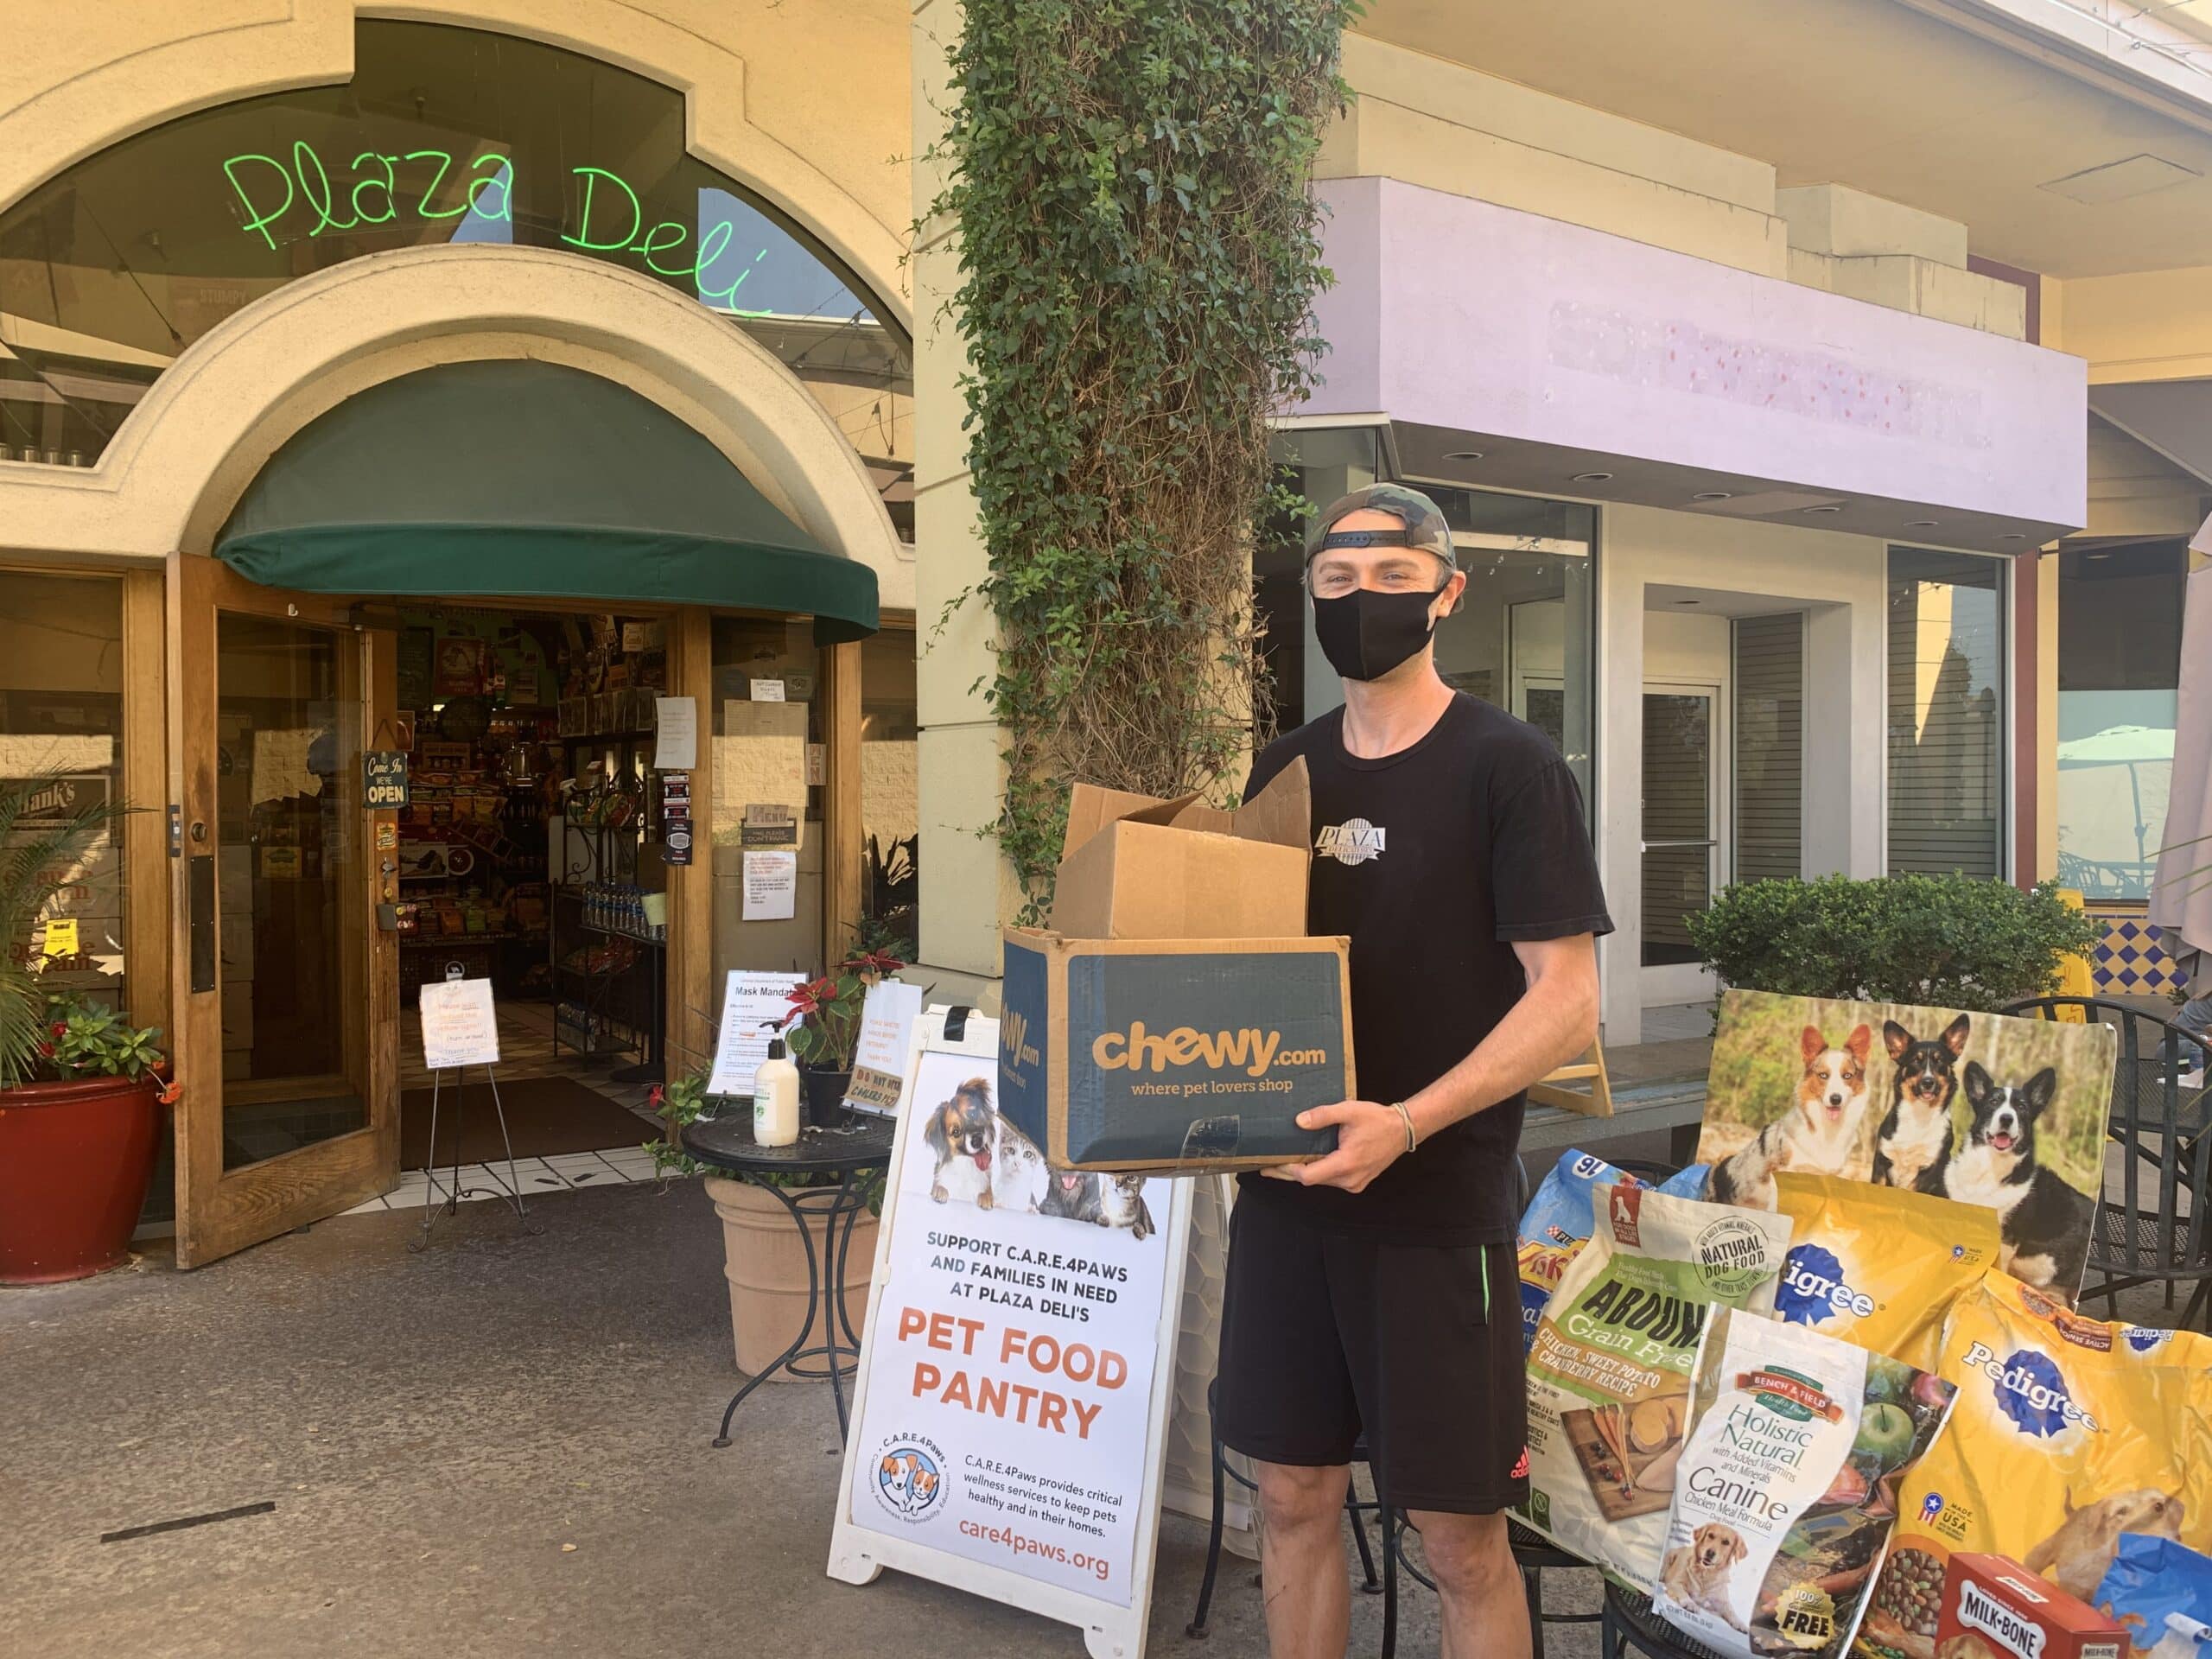 C.A.R.E.4Paws Donation Drive in Santa Barbara at Plaza Deli employees with pet food donations